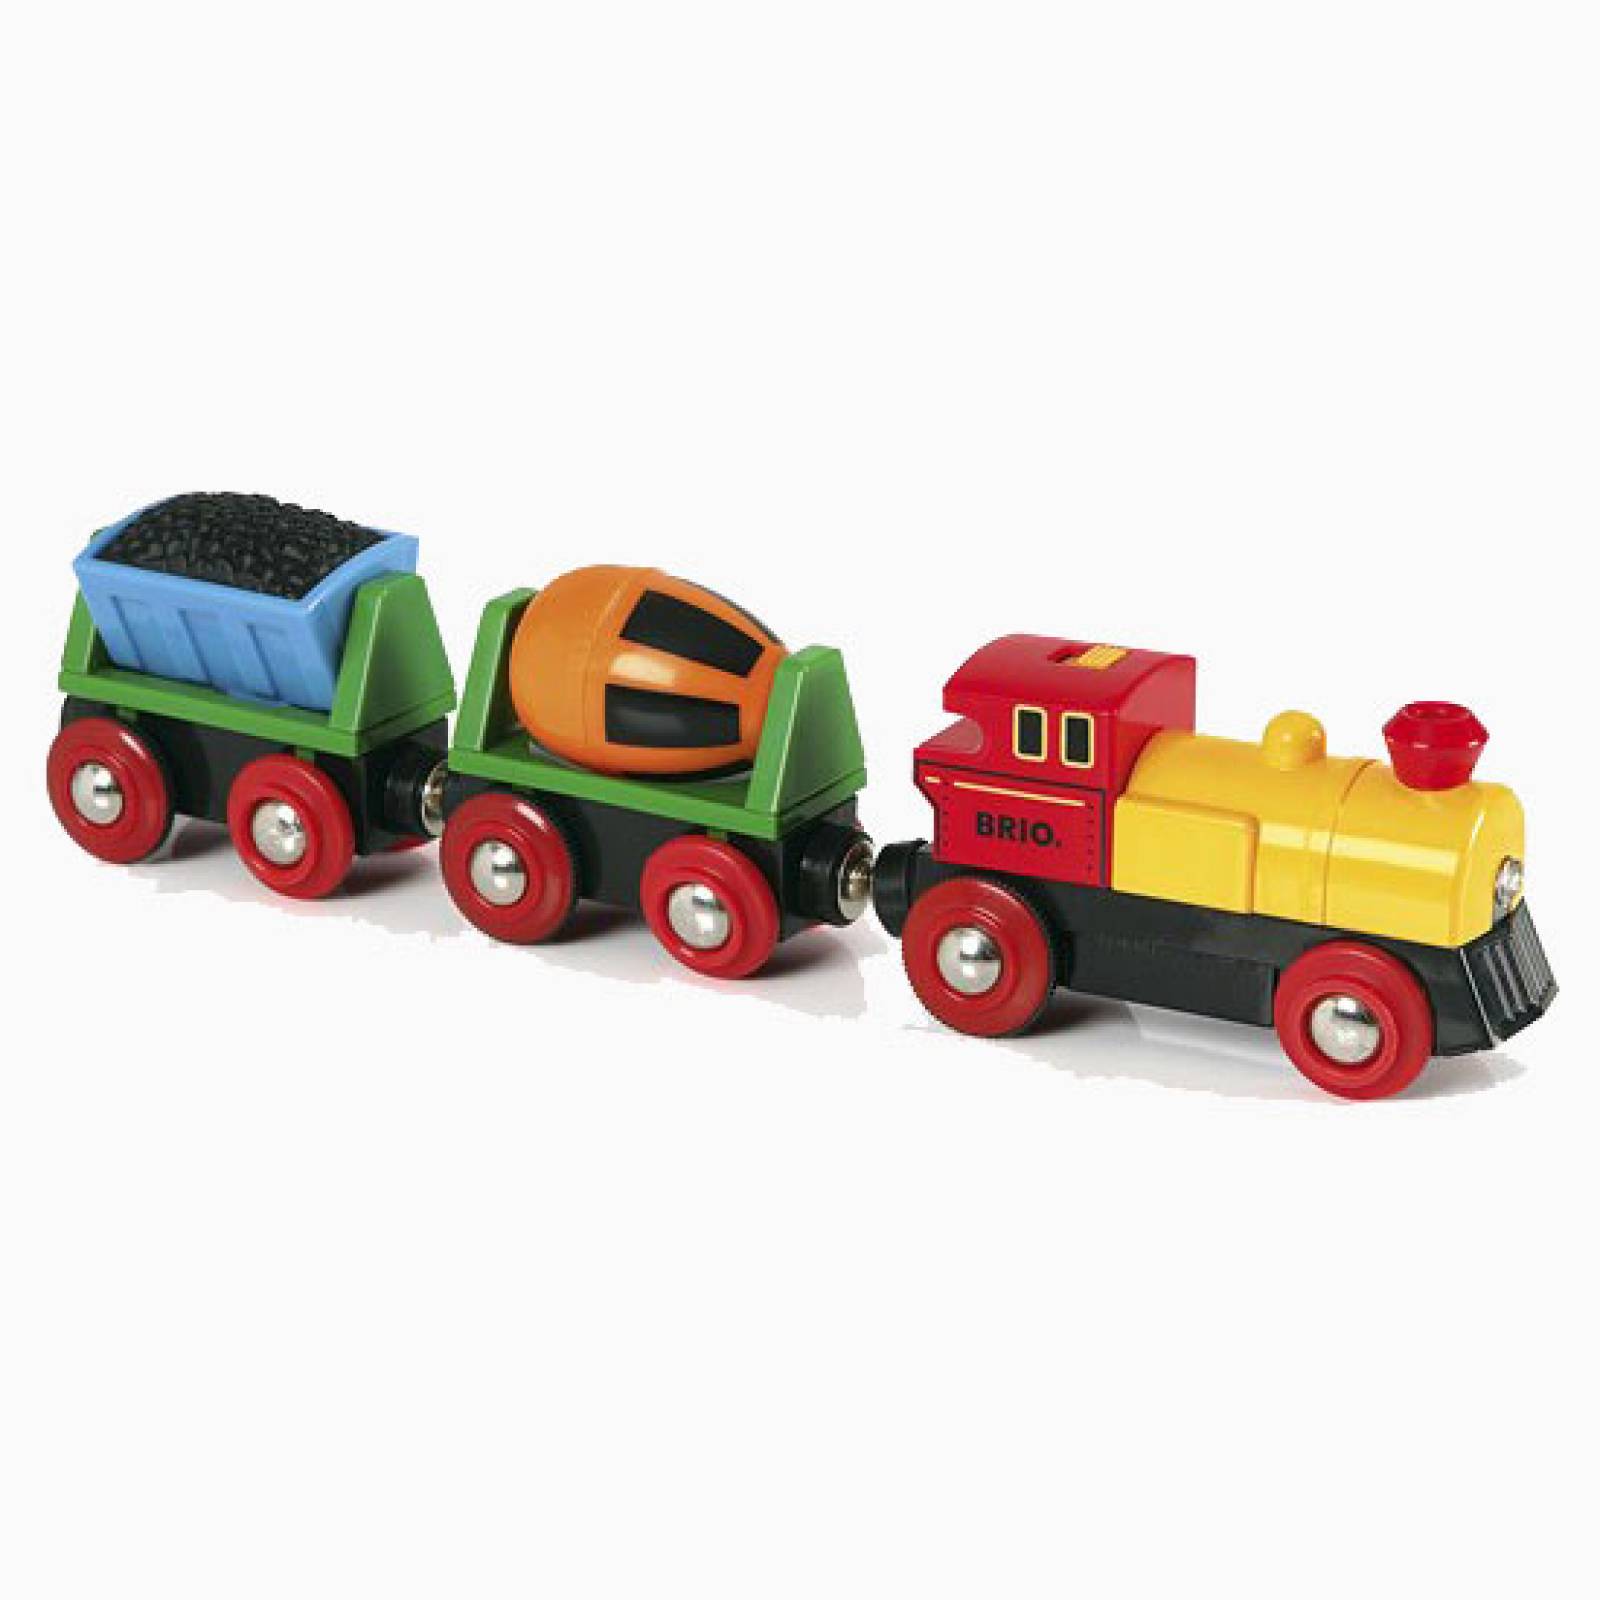 Battery Operated Action Train BRIO Wooden Railway 3+ thumbnails